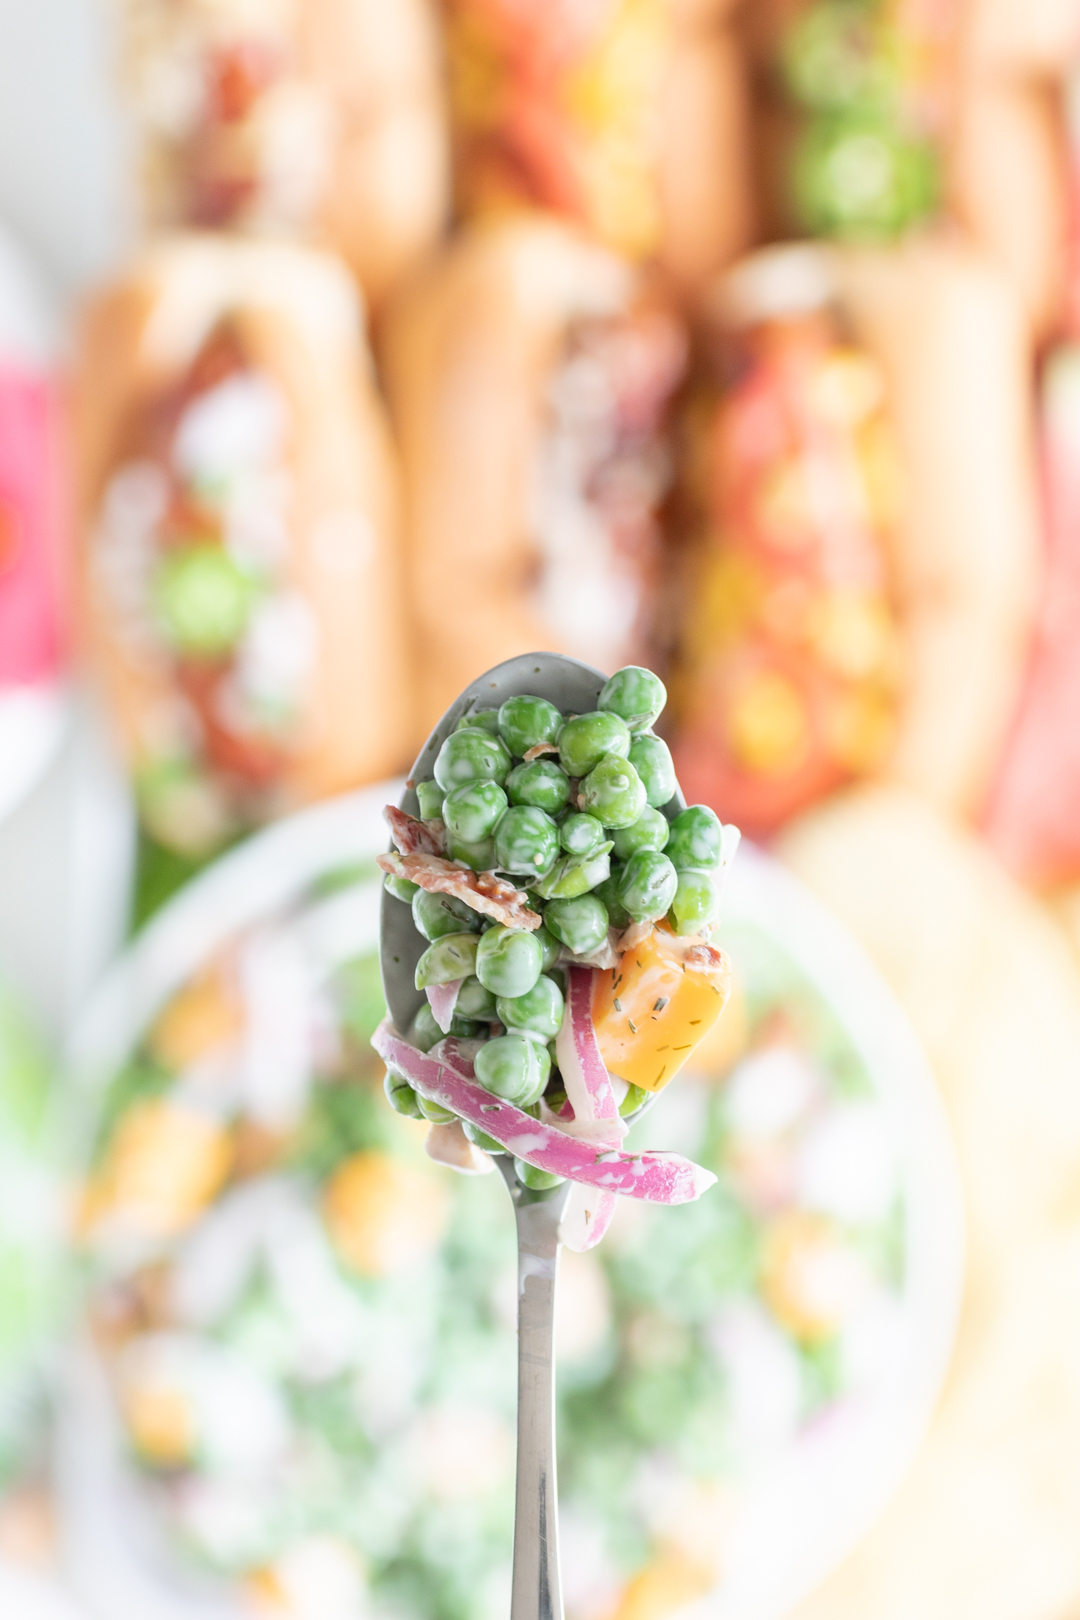 up close view of spoonful of classic summer pea salad with cheese chunk, slivered onions and bacon bits.